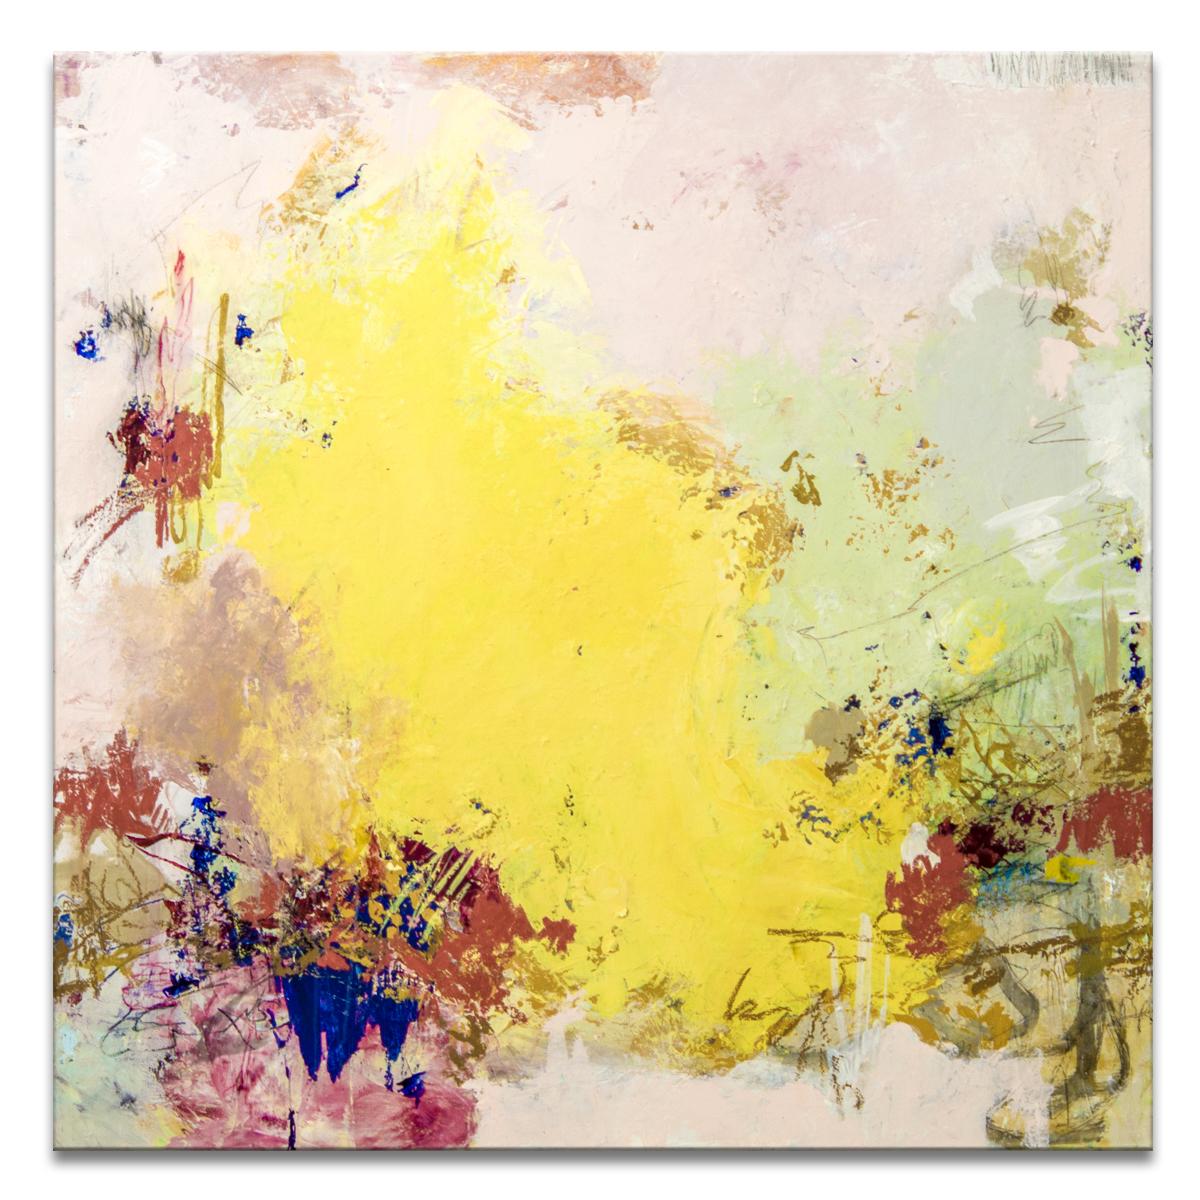 ‘Summer View' Wrapped Canvas Original Painting features a vibrant abstract aesthetic in tones of yellow, blush, beige, brown, taupe, blue, mauve, and green. Inspired by nature and Bible verse Samuel 1:11, Tammy Keller's positivity and light radiates